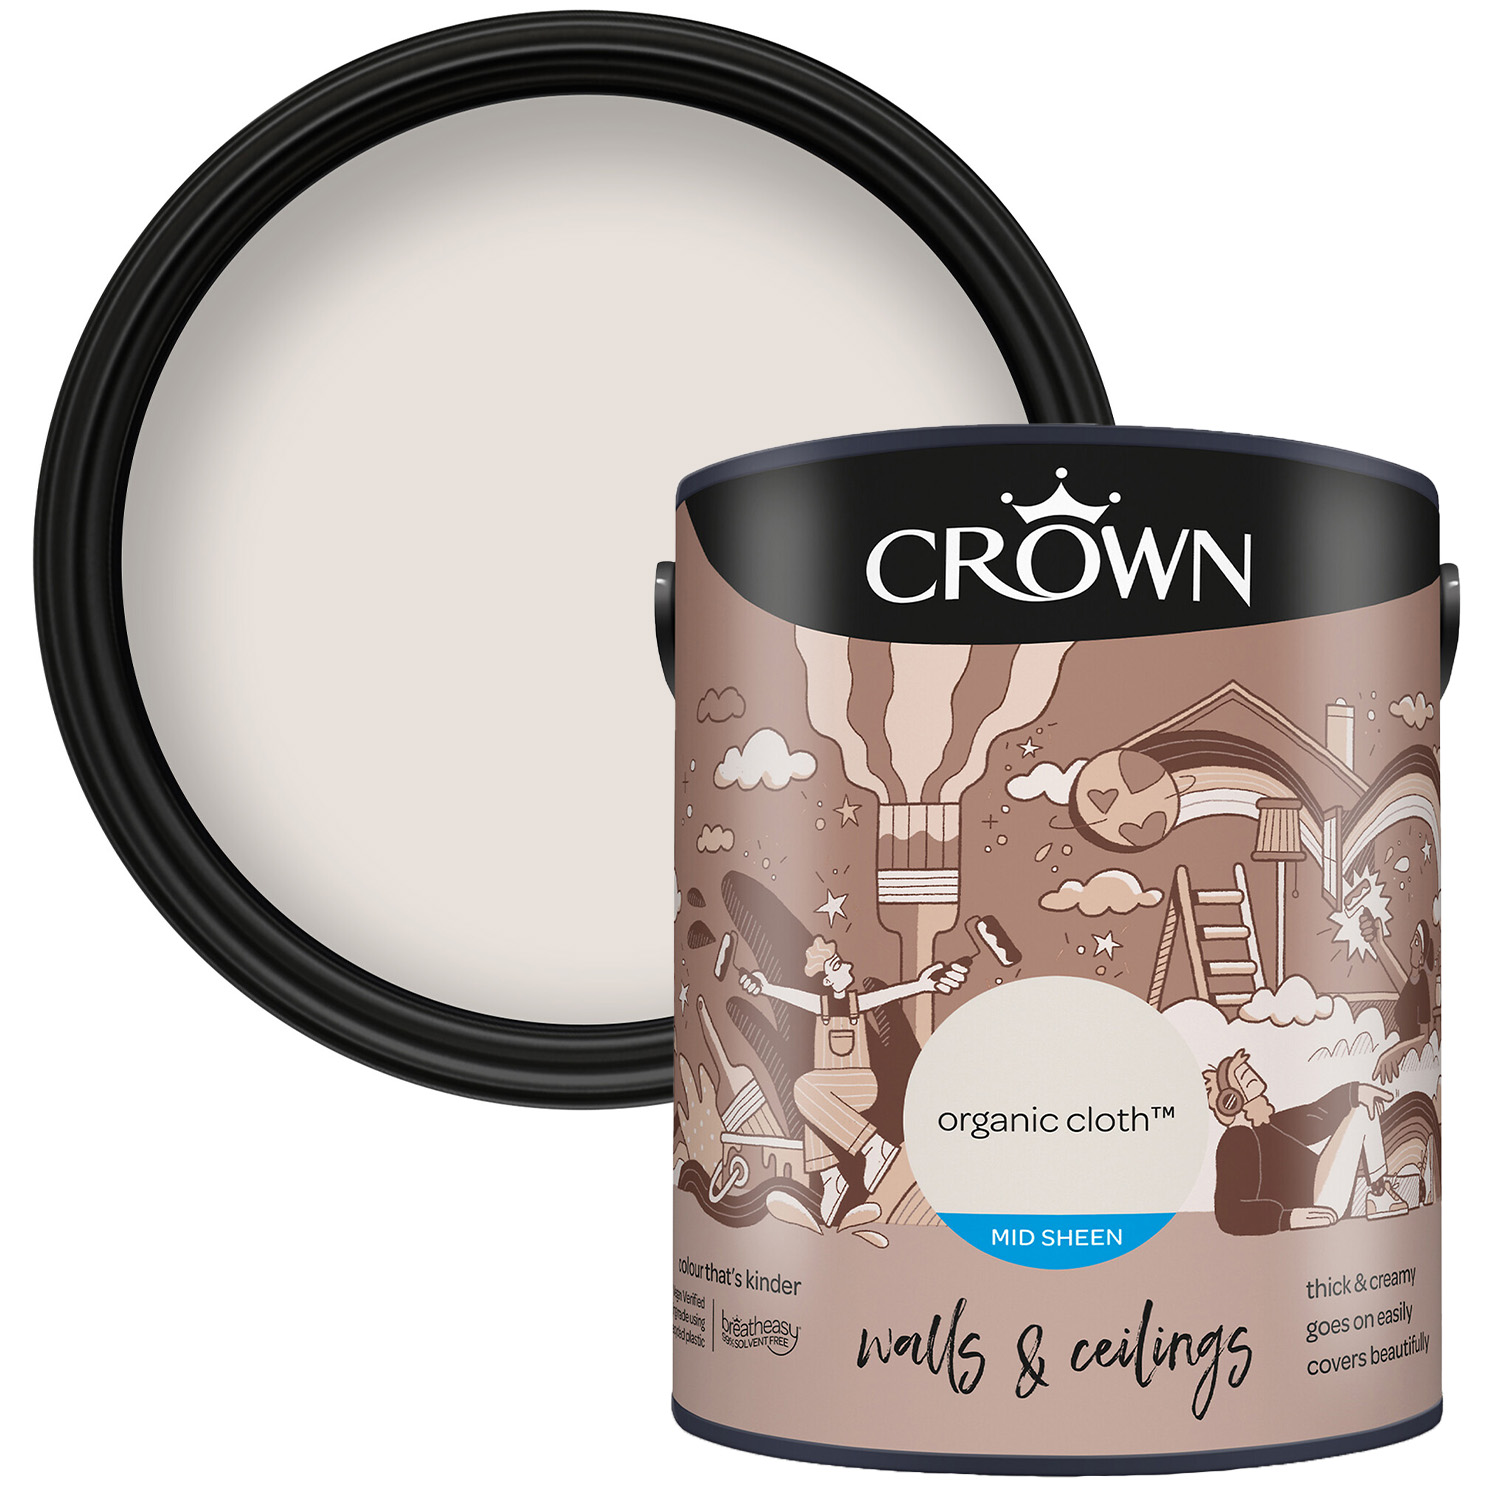 Crown Walls & Ceilings Organic Cloth Mid Sheen Emulsion Paint 5L Image 1